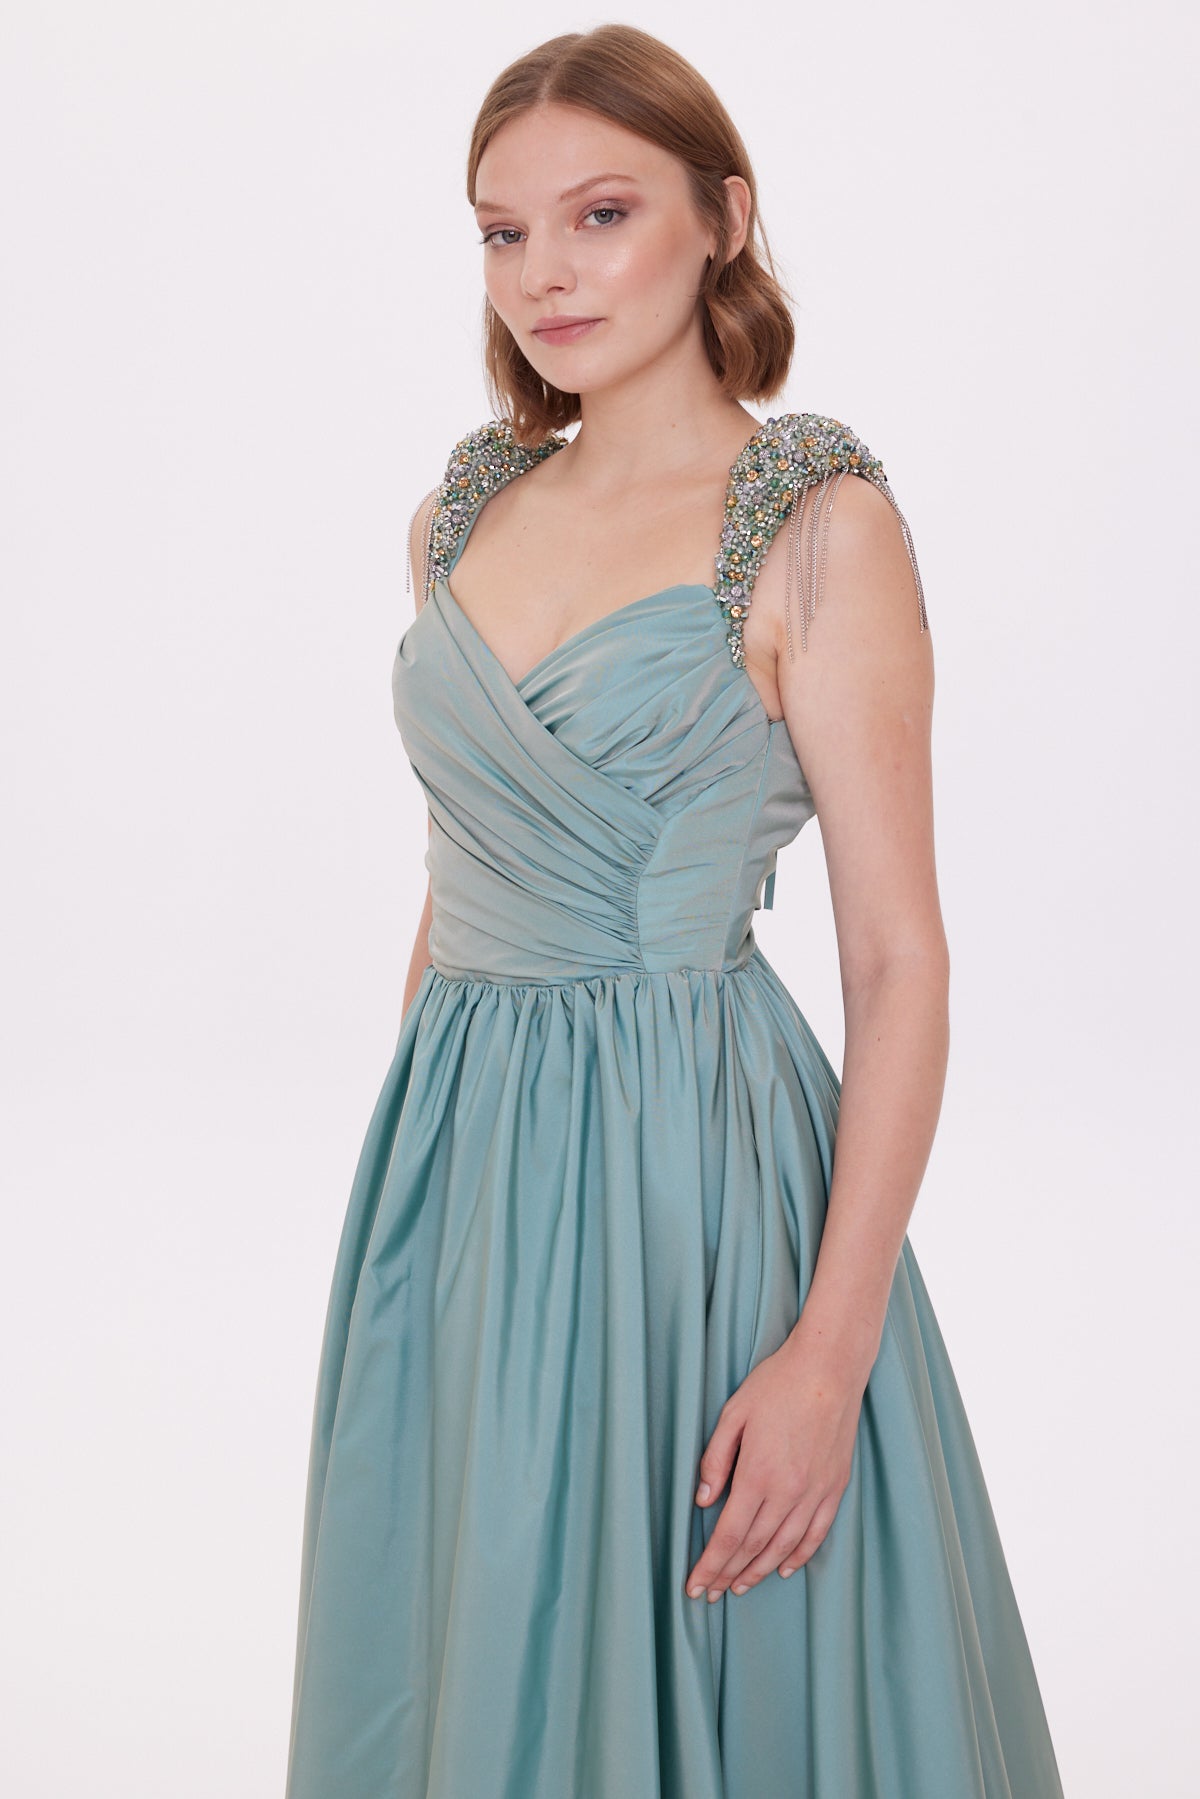 Taffeta Dress with Stone Embroidered Drape Detail on Shoulders